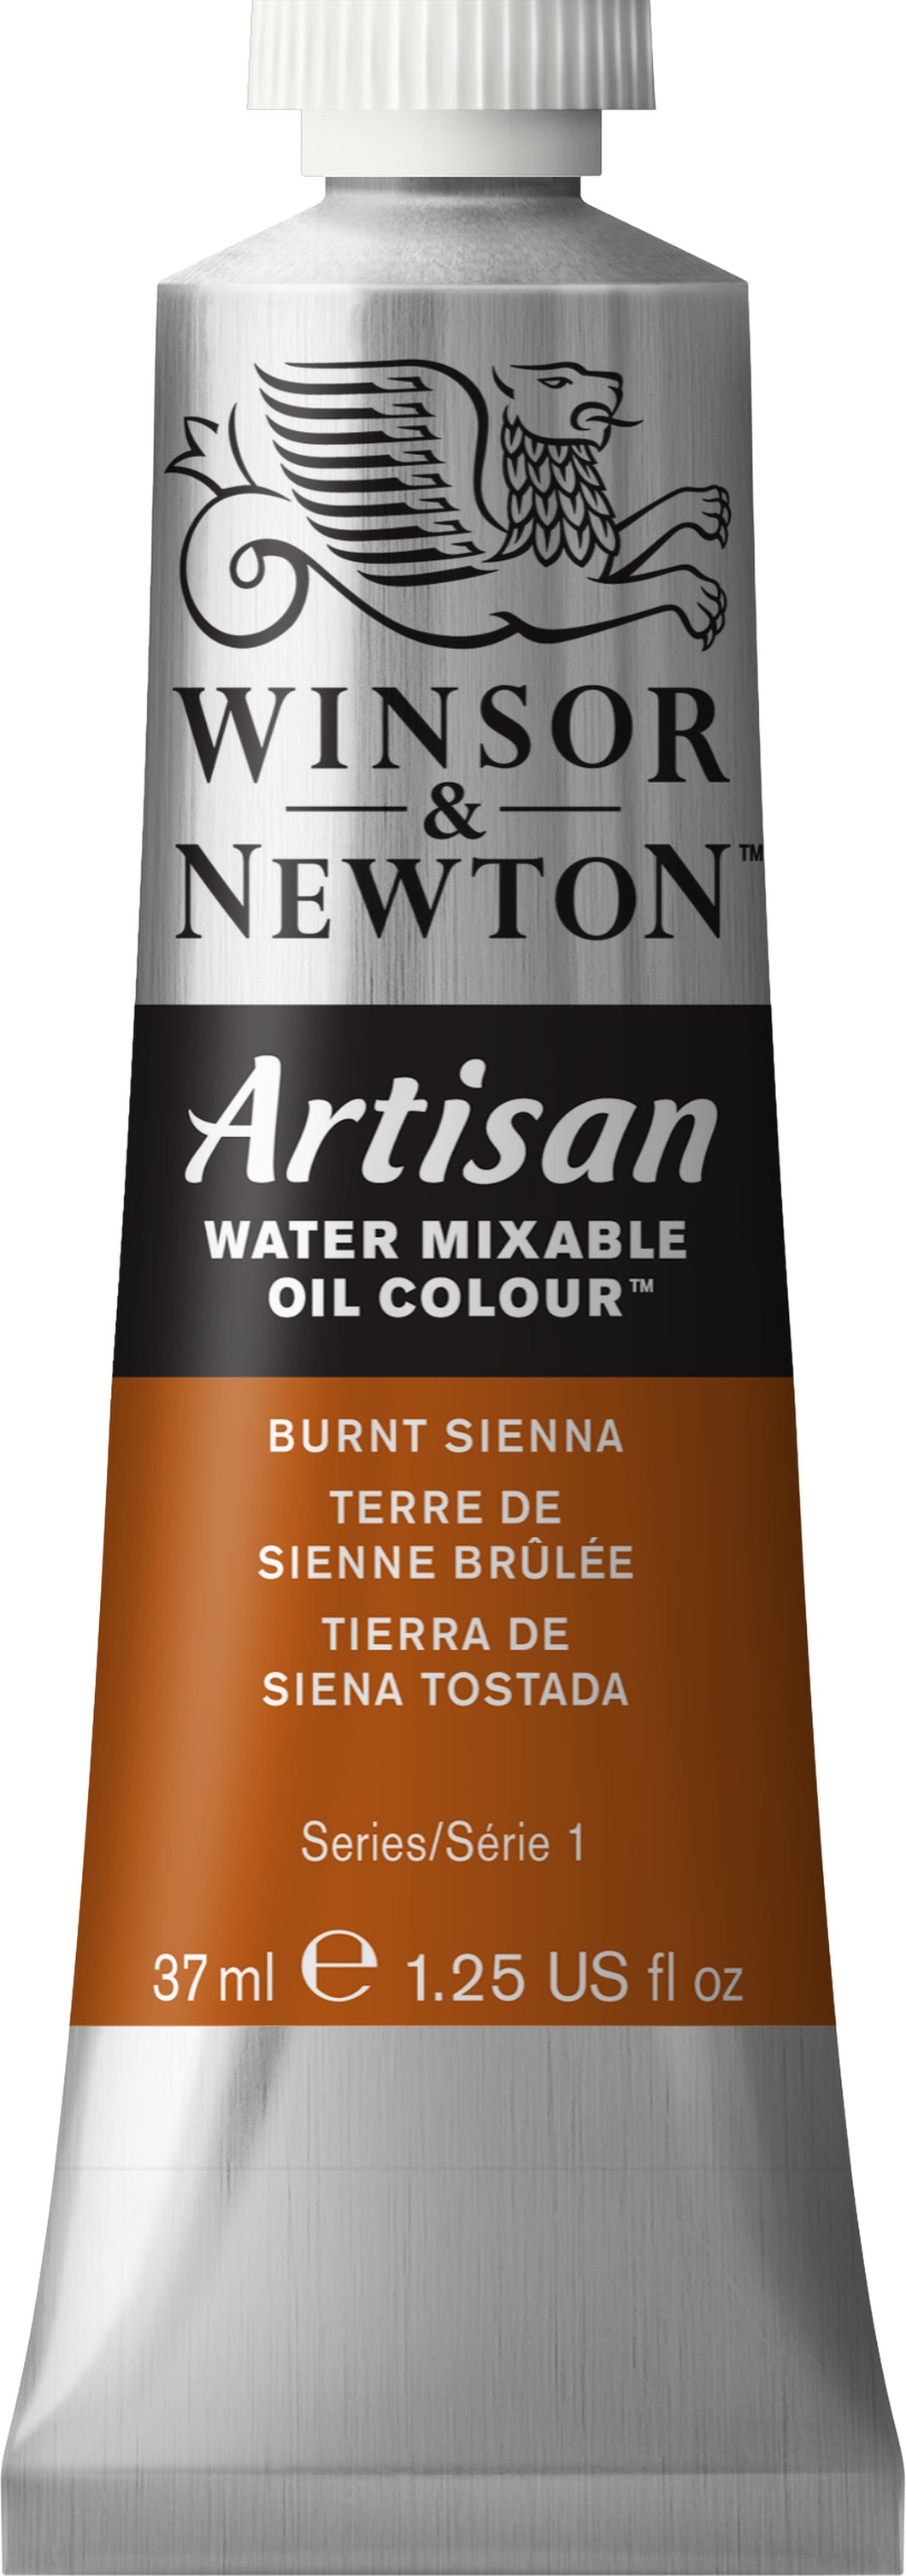 Artisan Water Mixable Oil Colors 37ml